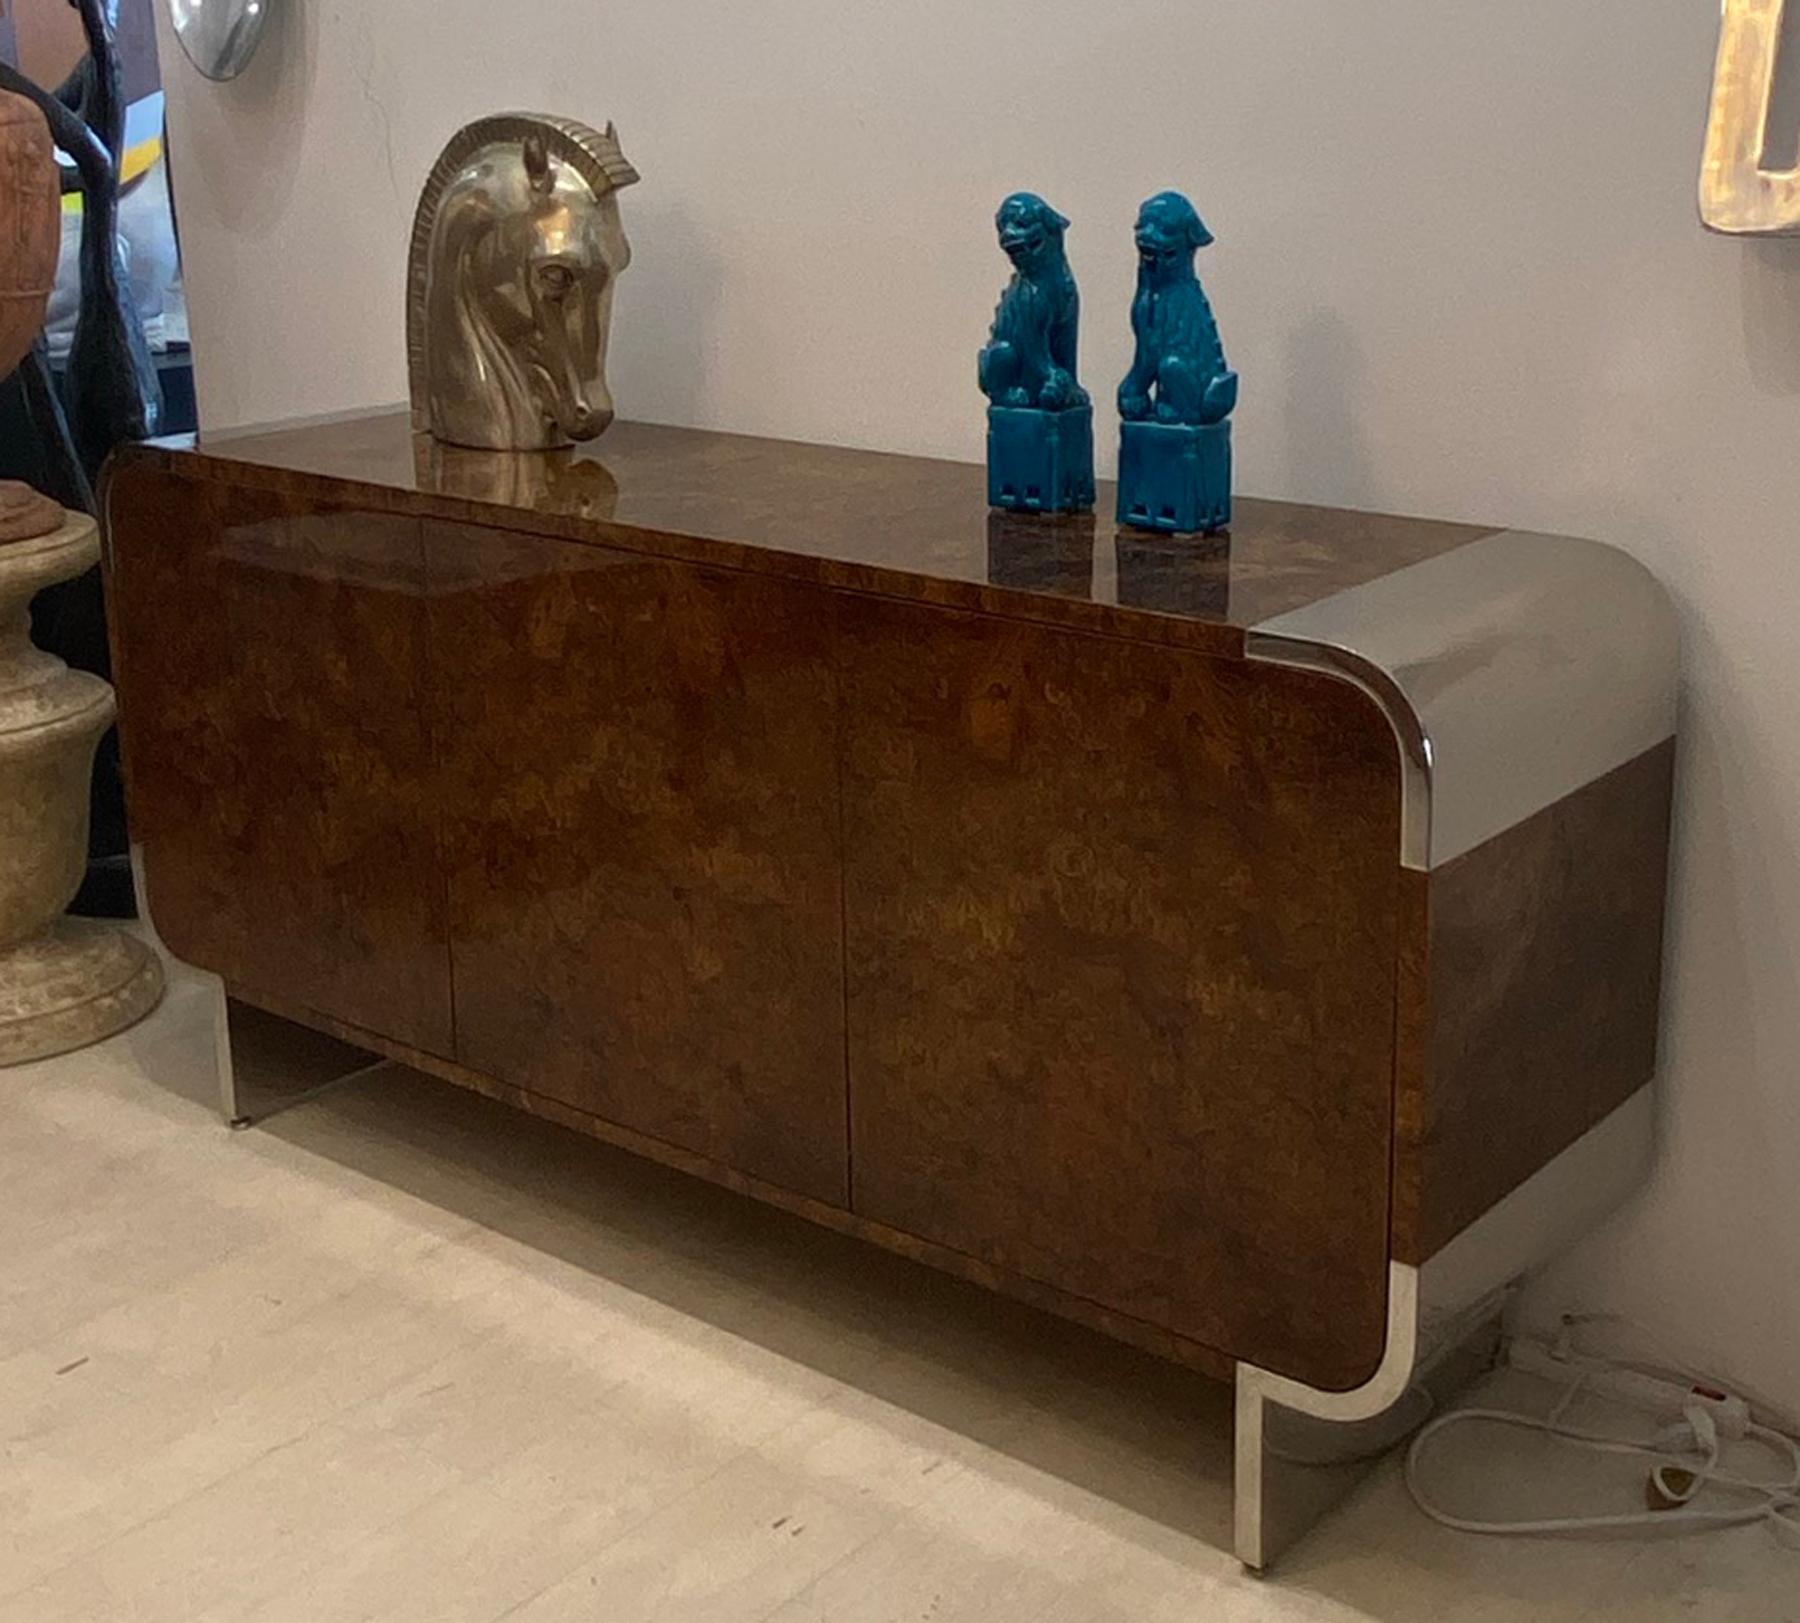 Burl credenza by Leon Rosen for the Pace Collection. Beautiful burl wood veneer polished steel rounded waterfall corners and legs. High gloss lacquer finish. Three push open doors. Three pull out drawers with three adjustable shelves below. Finished